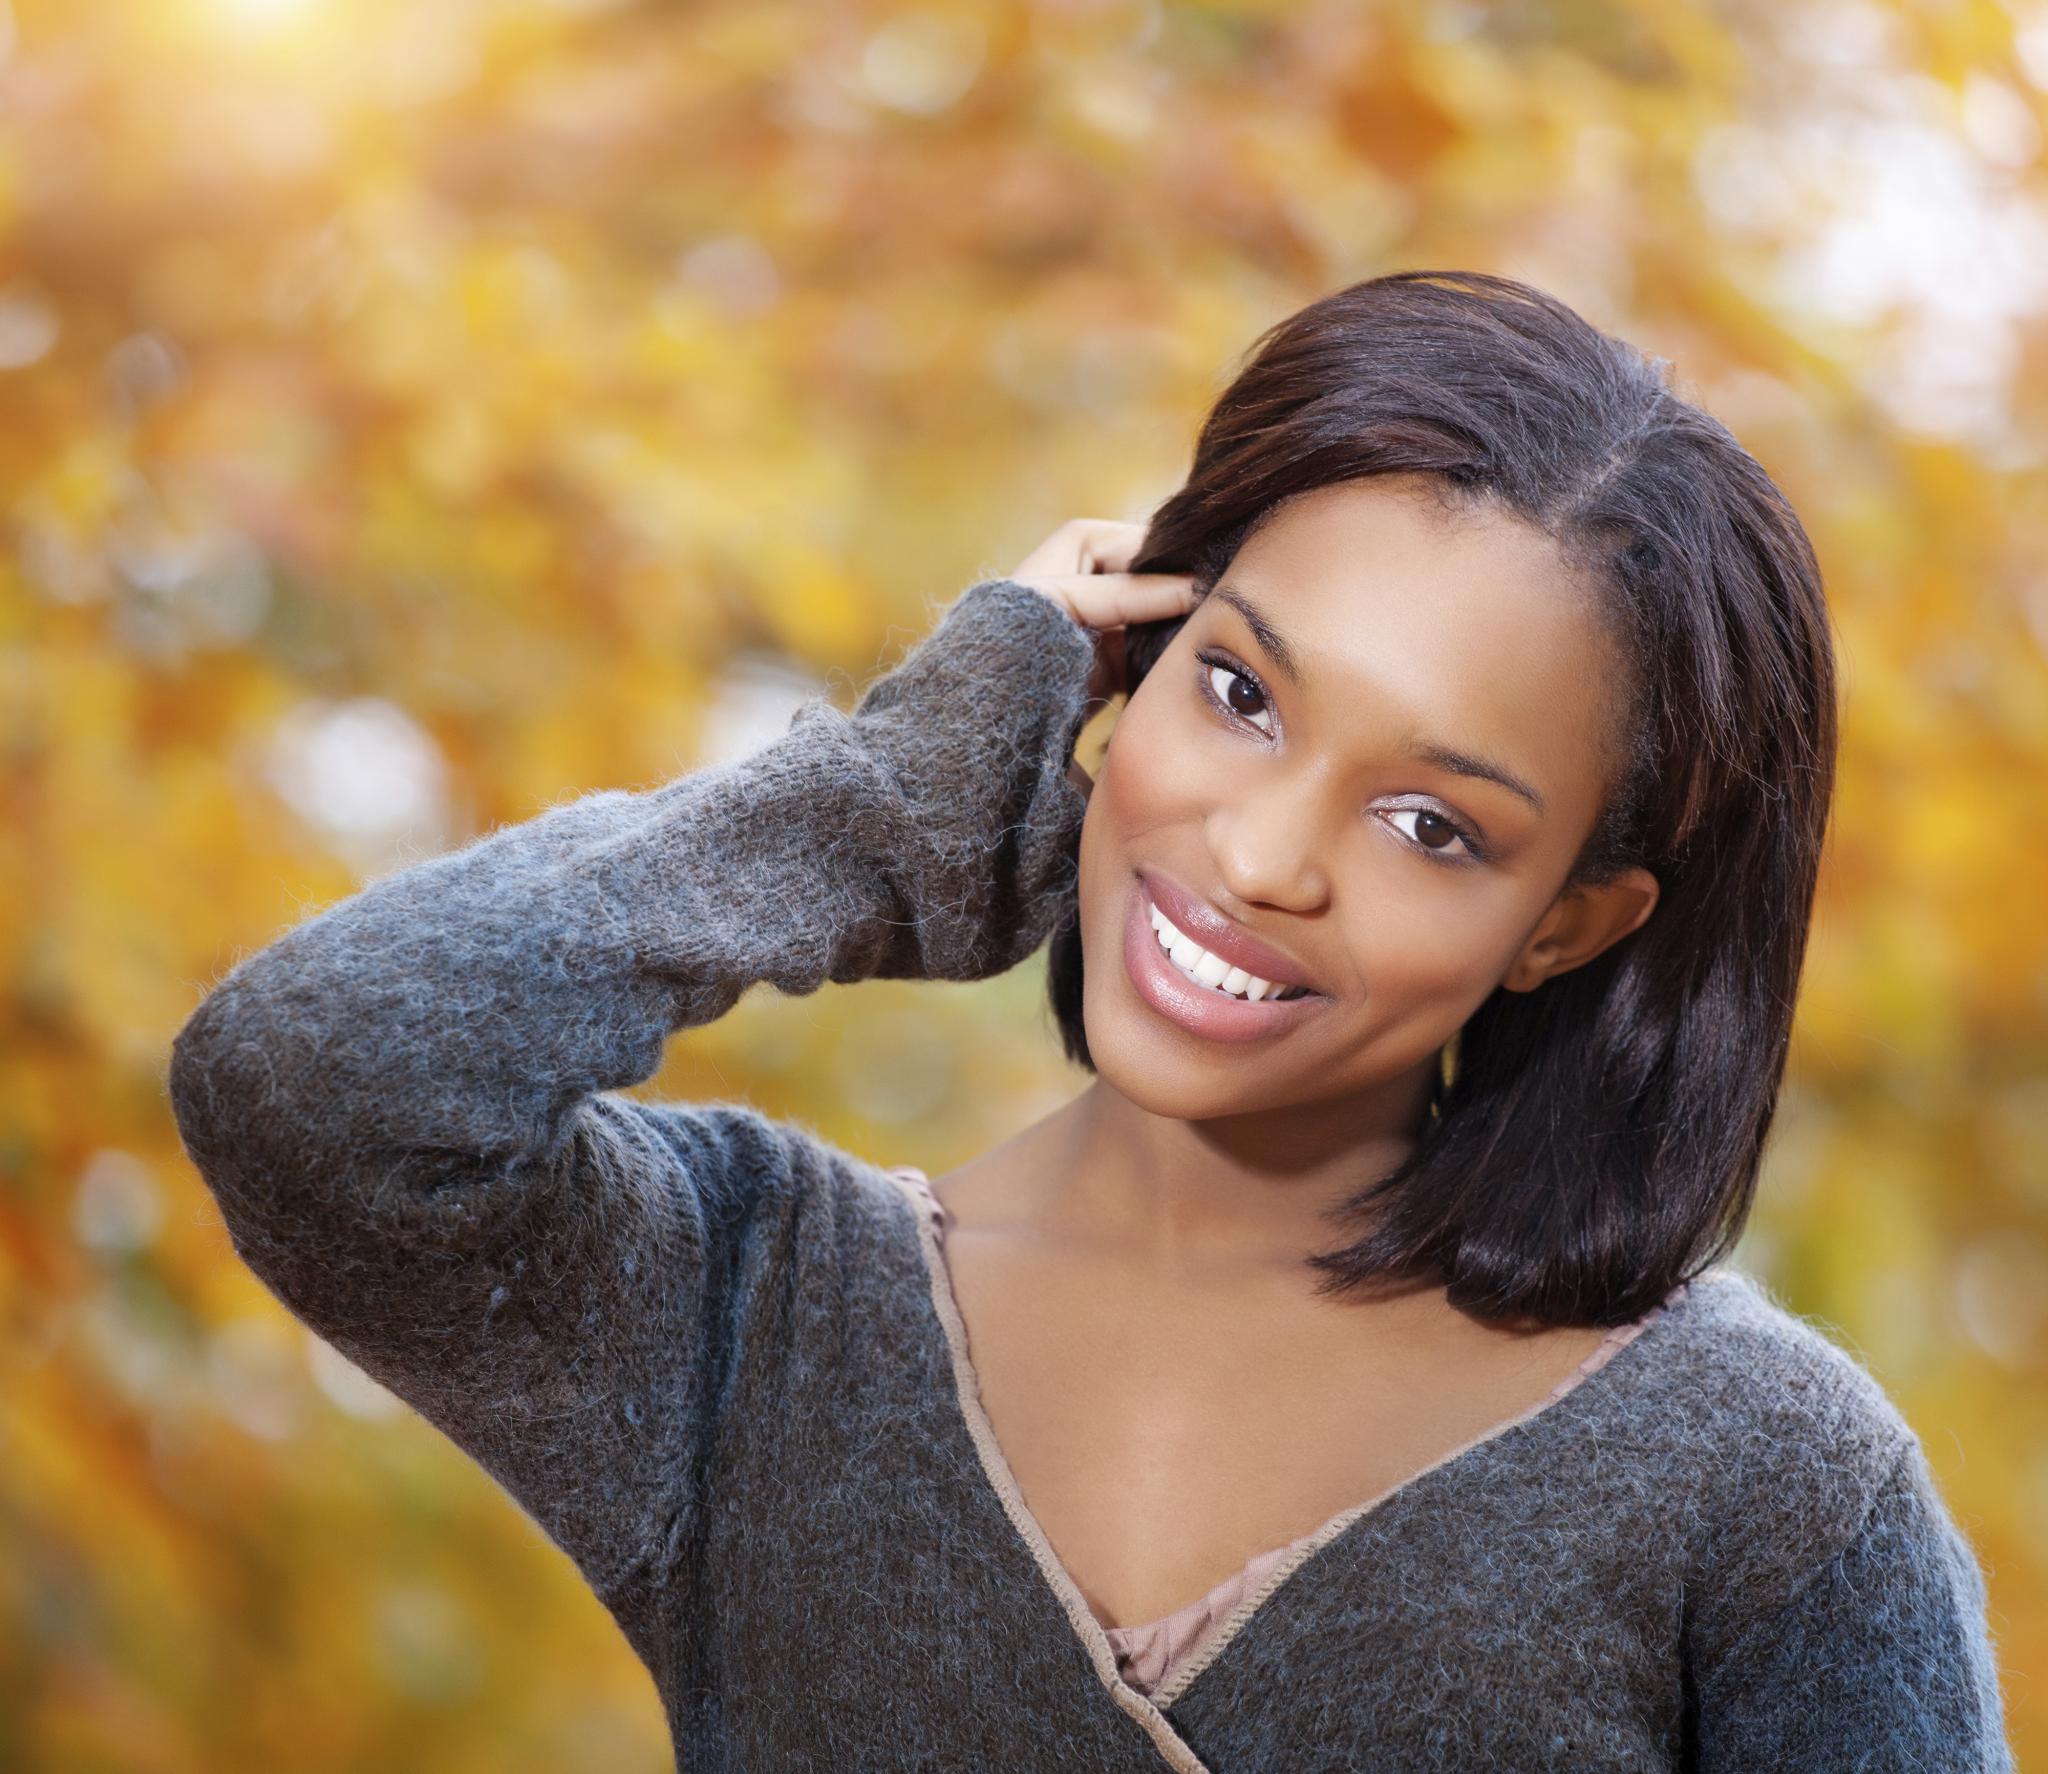 The Do’s and Don’ts of Fall Hair Care For Relaxed Hair